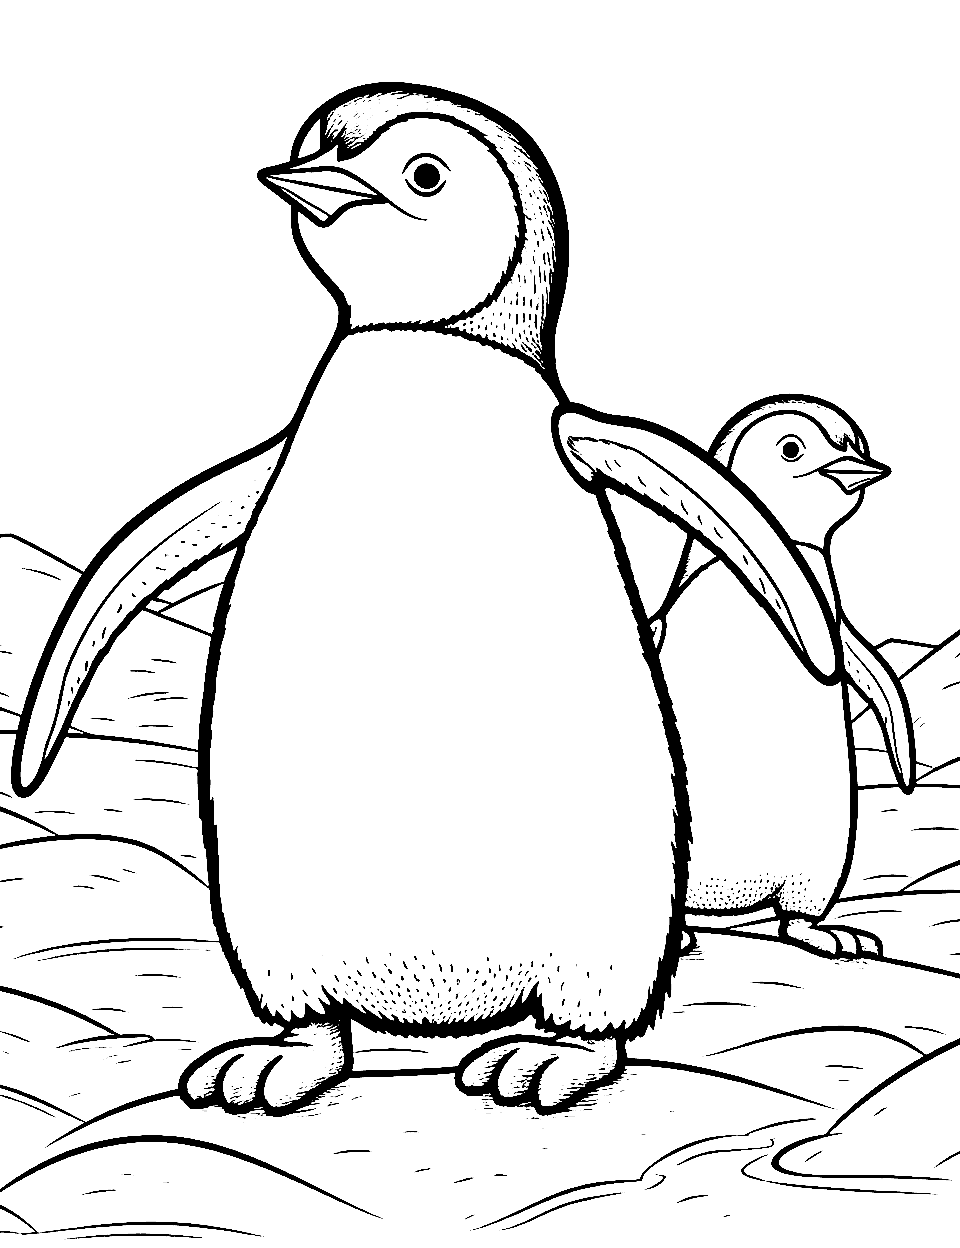 Penguins Hunting Coloring Page - Two penguins looking around for food.